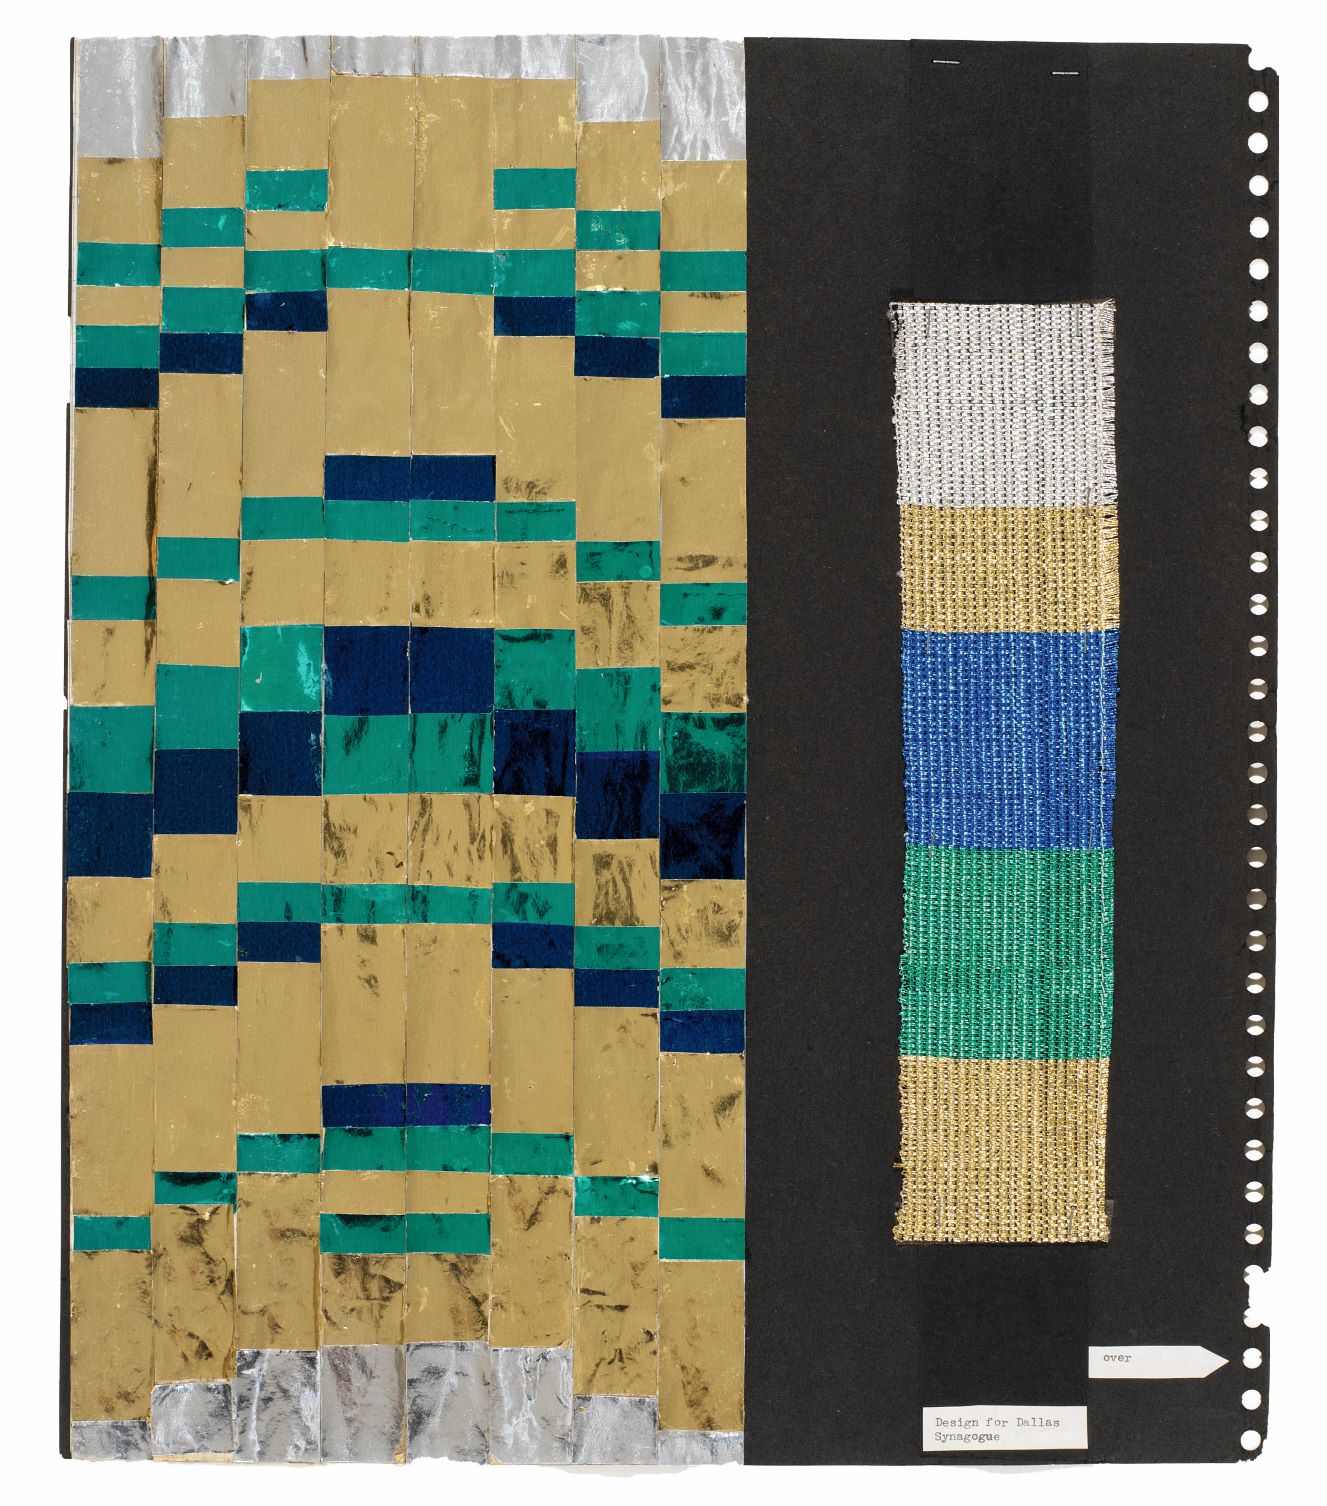 Anni Albers, Study for Temple Emanu-El Ark Panels, 1957. Foil and metallic thread on card. 17 × 14 1/2 in. (43.2 × 36.8 cm). Picture credit: copyright © 2020 The Josef and Anni Albers Foundation/Artists Rights Society (ARS), New York/DACS, London / Photo: Tim Nighswander/Imaging4Art Temple Emanu-Eel is a large synagogue in Dallas, Texas.